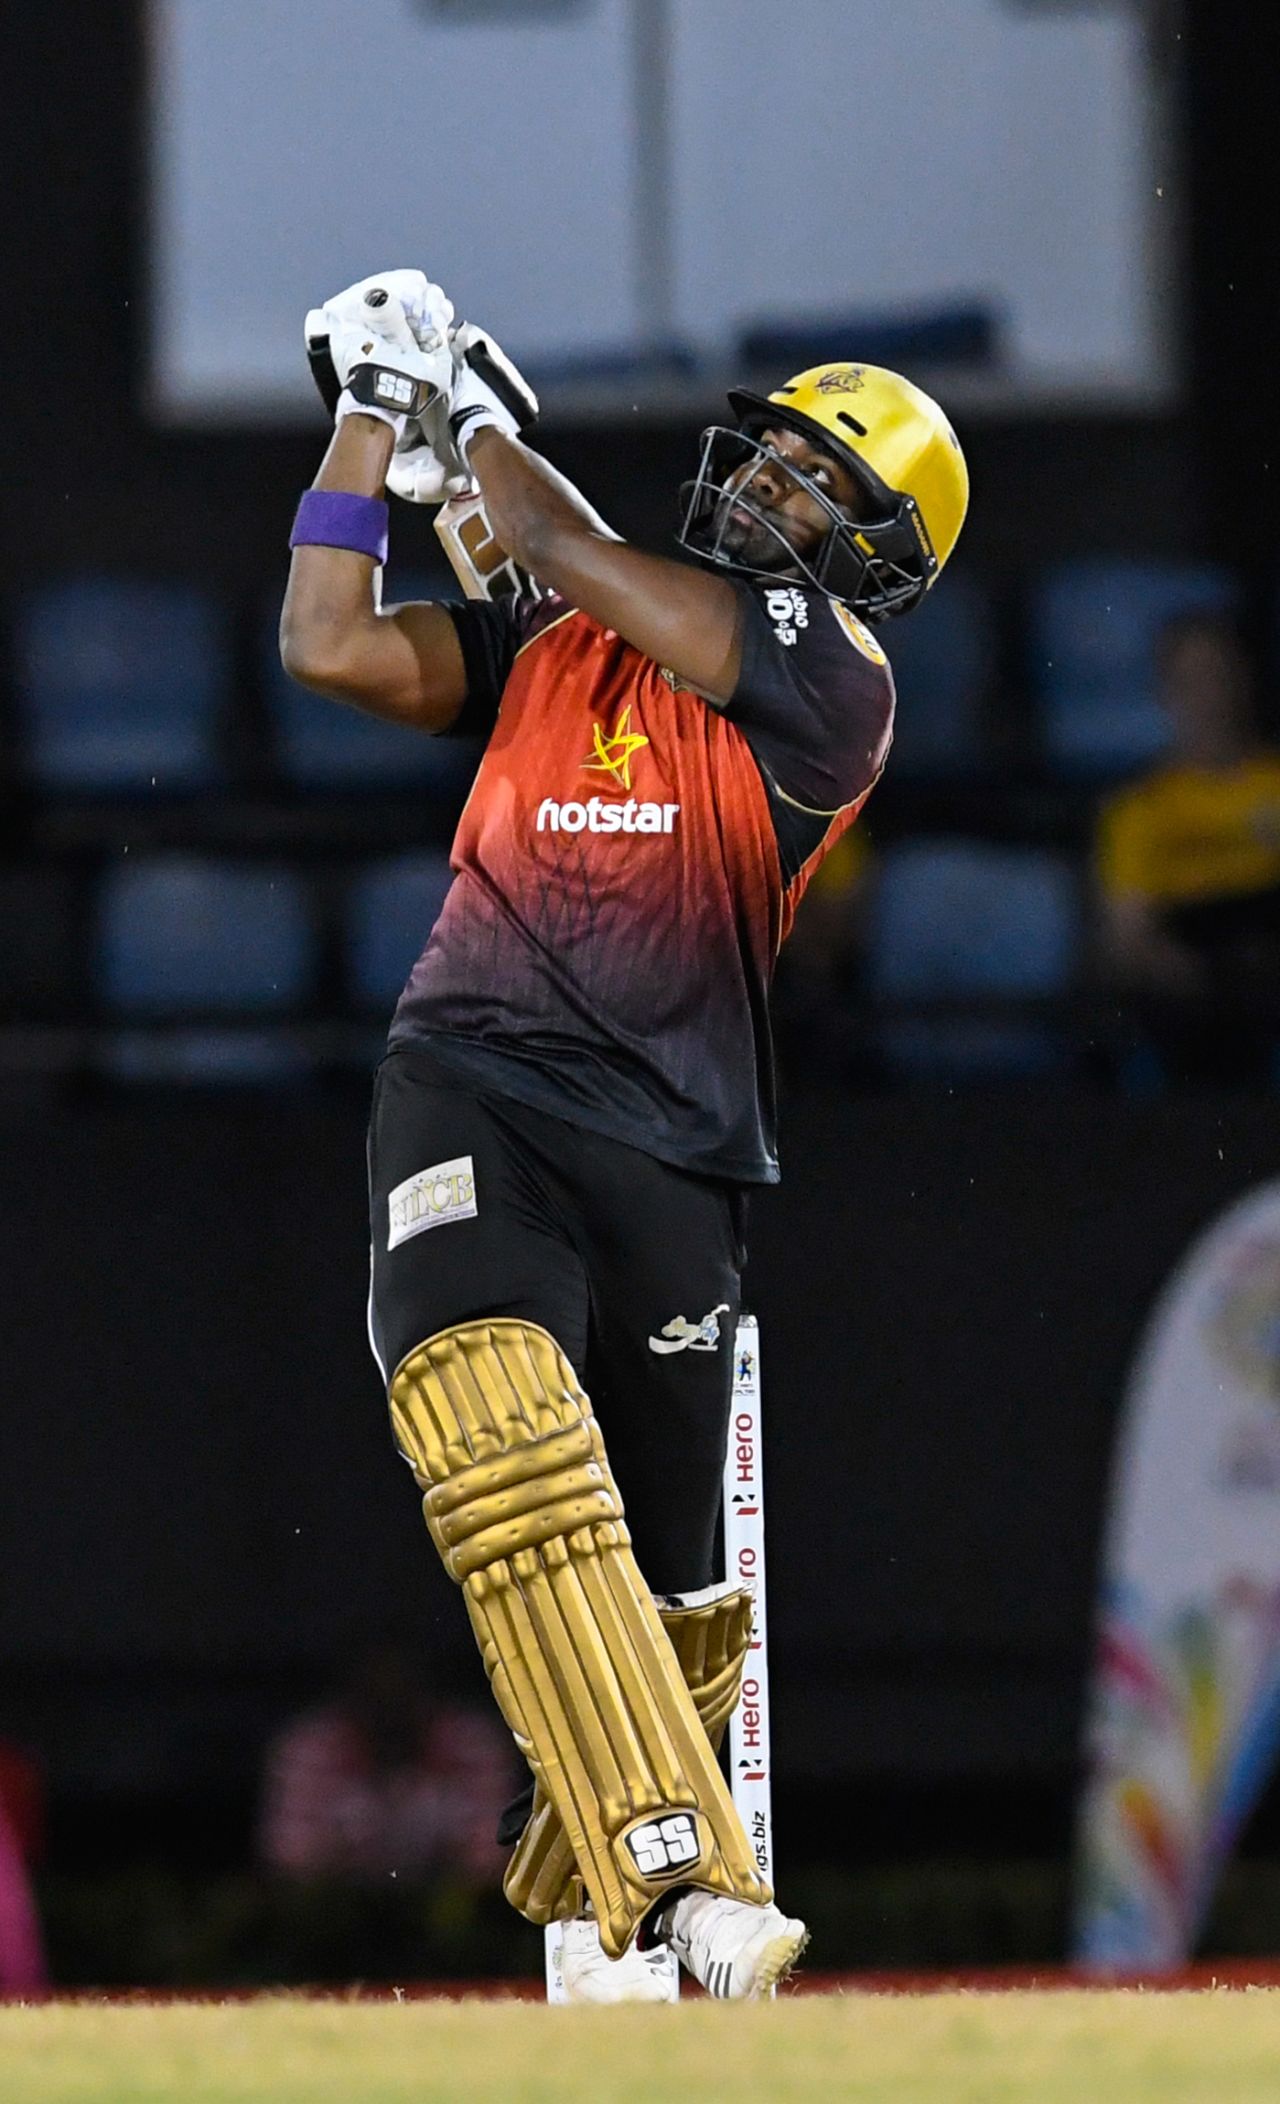 Darren Bravo heaves one over the leg side, ST Lucia Stars v Trinbago Knight Riders, Gros Islet, August 16, 2018